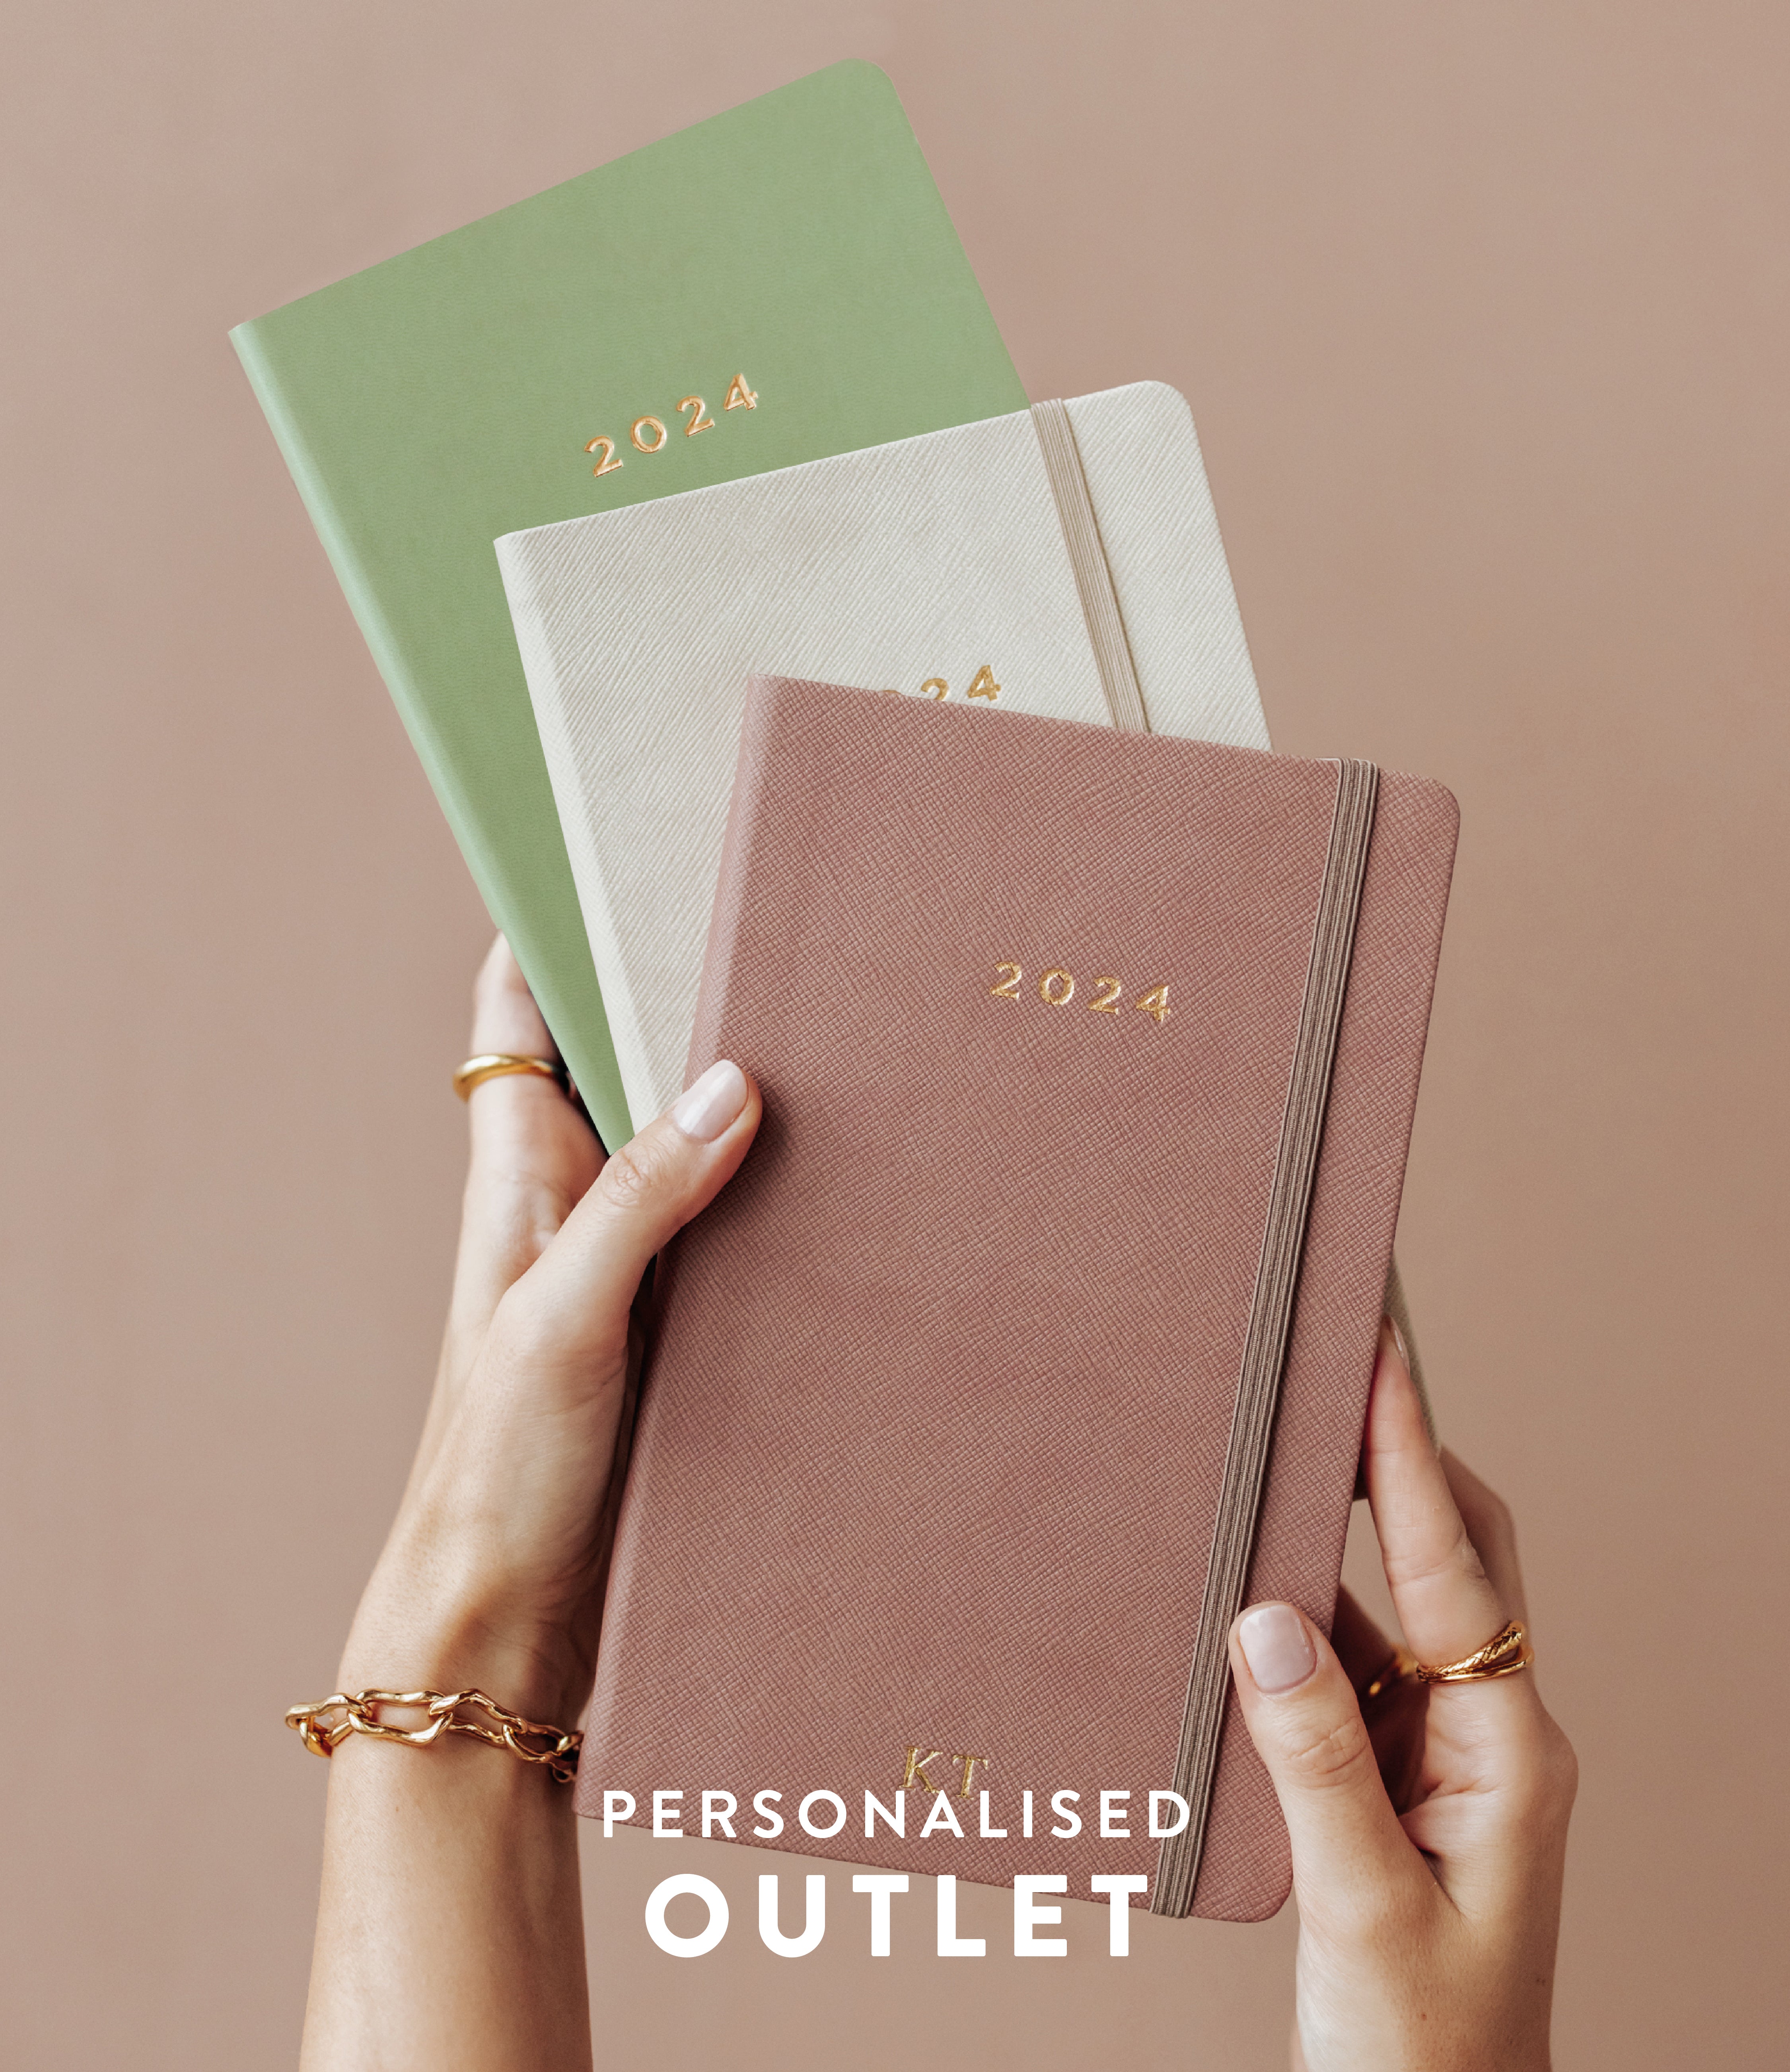 (Personalised Outlet) 2024 Minimal Planner